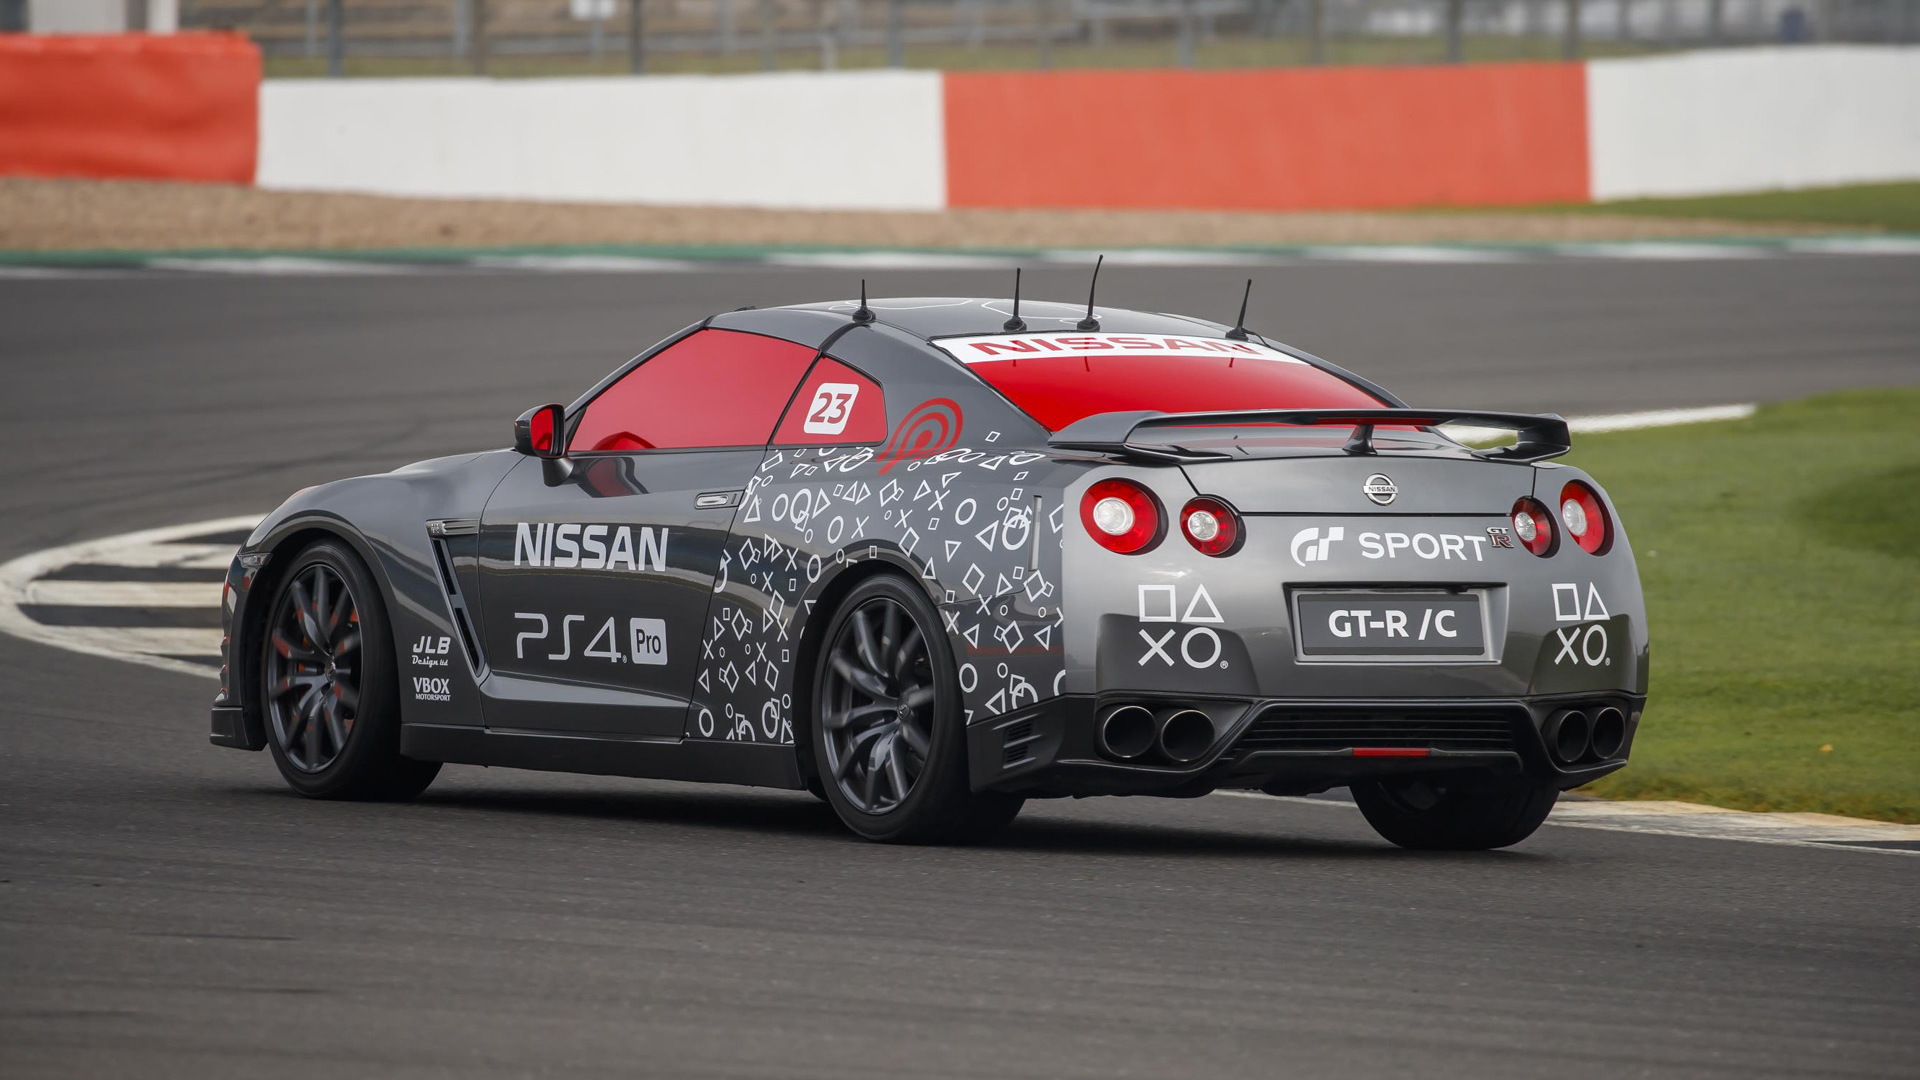 Jann Mardenborough drives a Nissan GT-R around a racetrack with a video game control